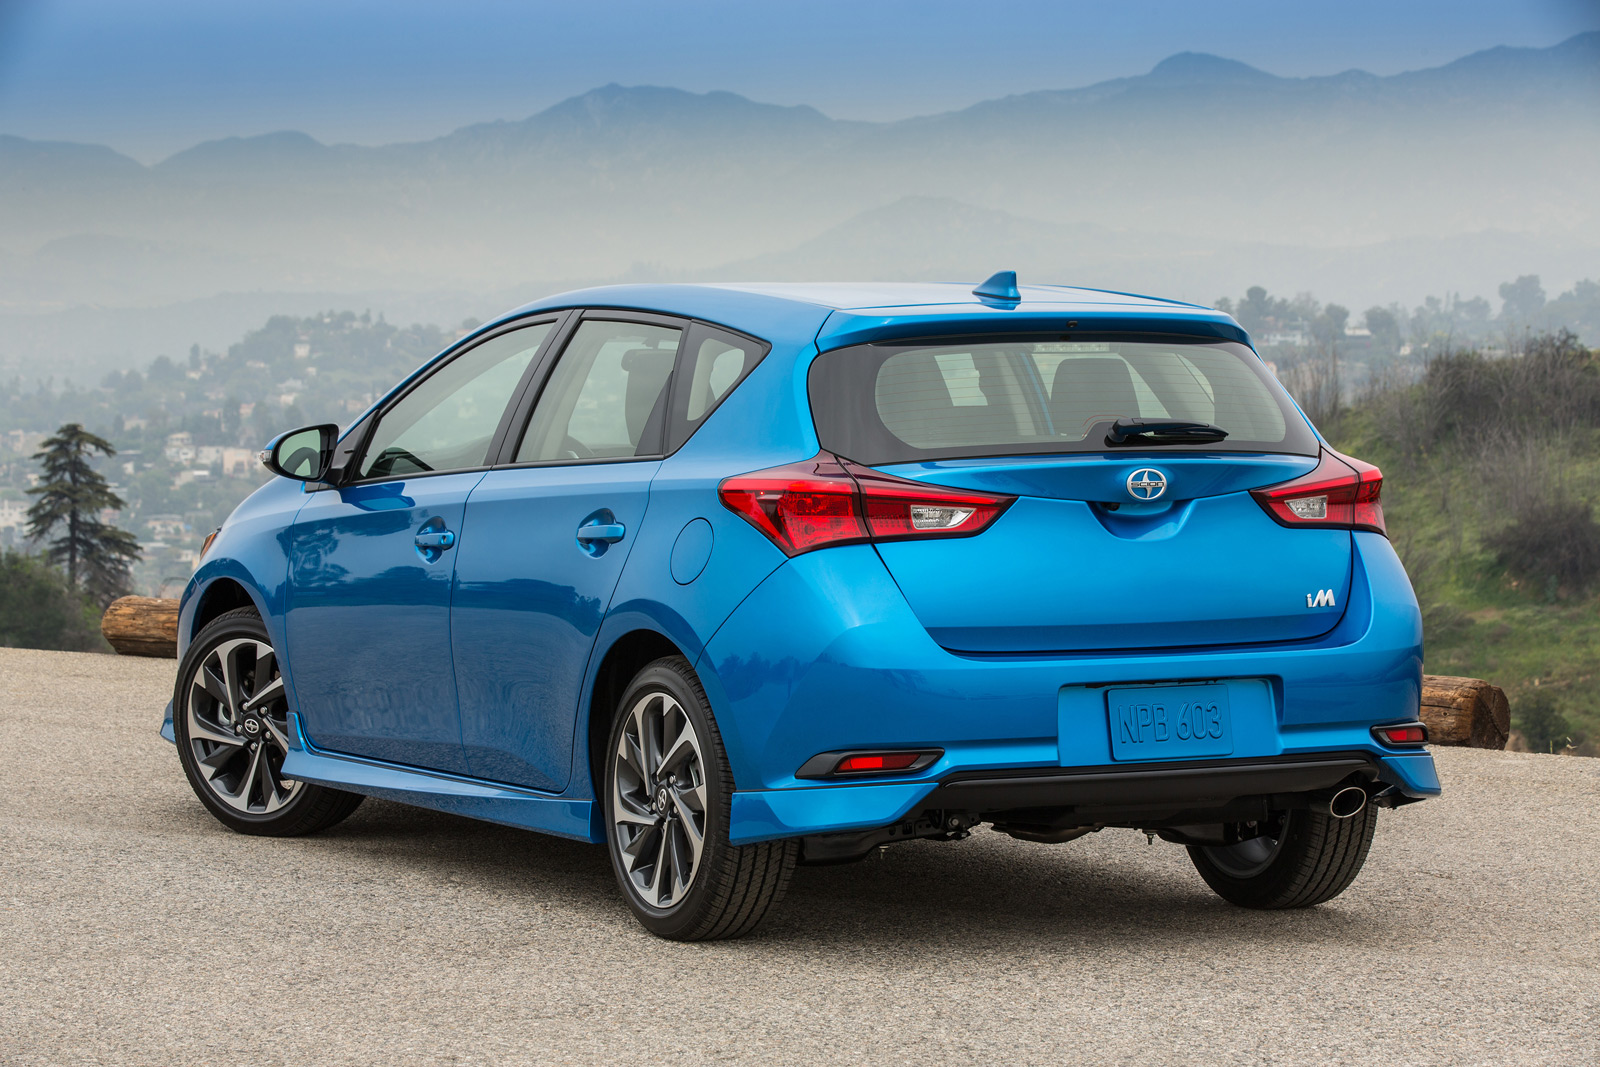 2016 Scion iM Is Ready To Fire Up The Fun Hatch Segment